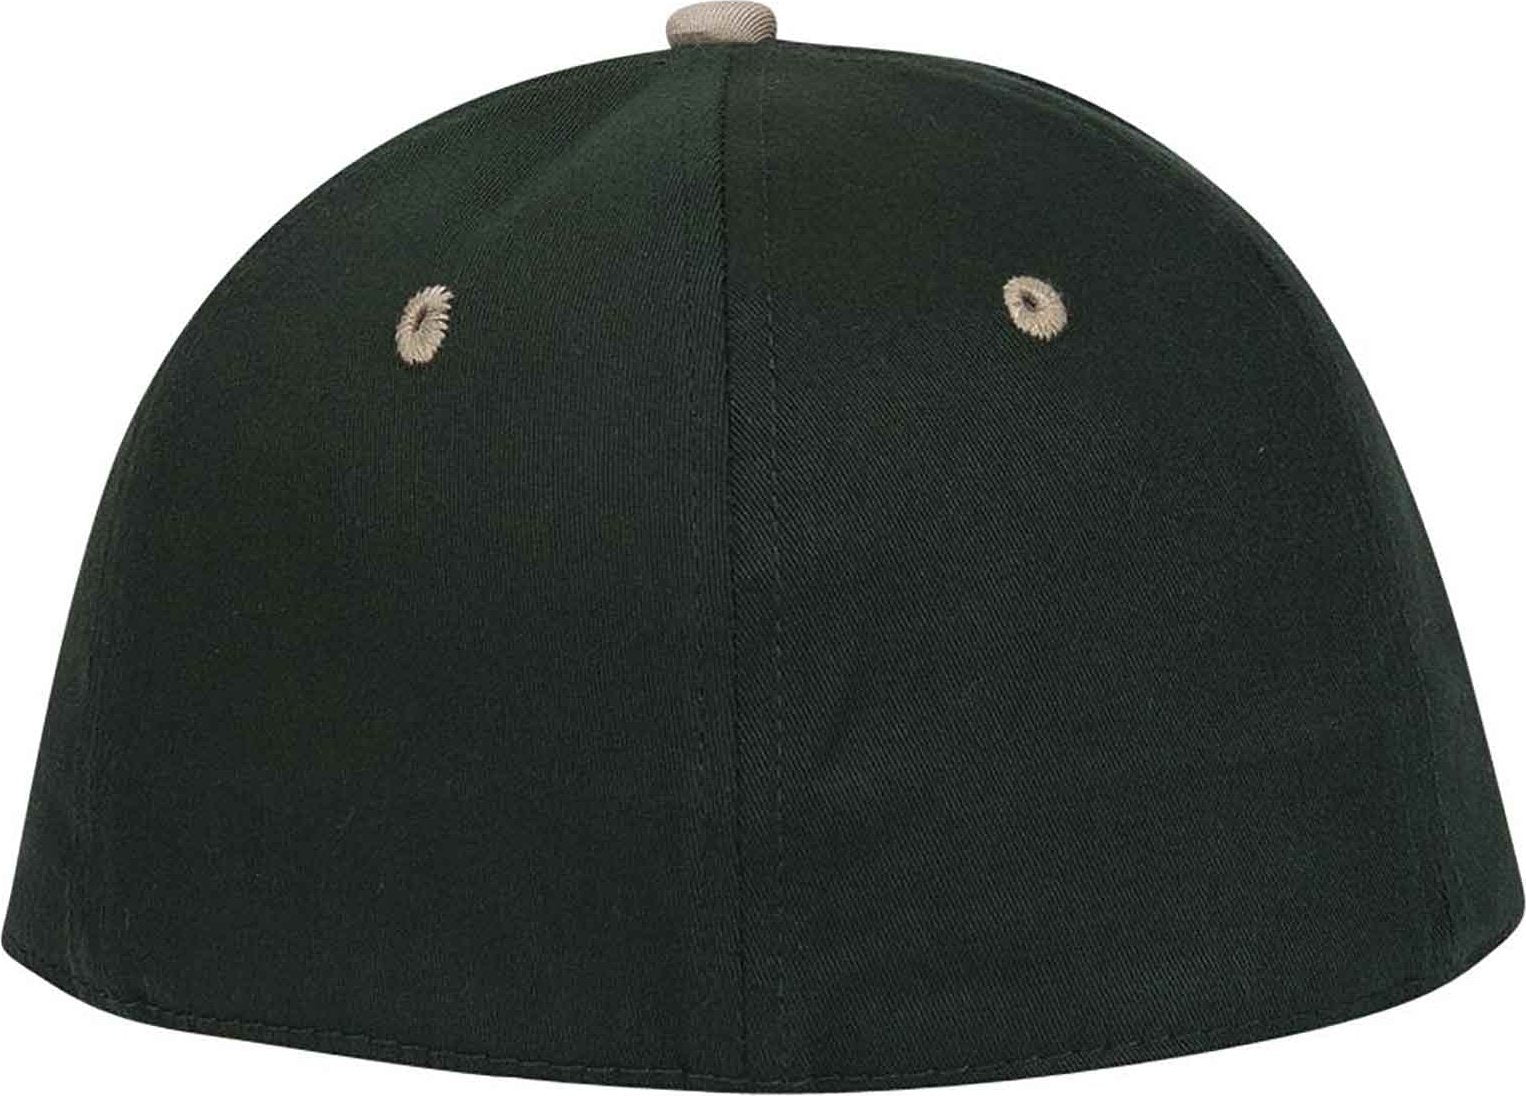 OTTO 12-267 Stretchable Deluxe Brushed Cotton Twill Sandwich Visor Low Profile Pro Style Cap S/M - Khaki Dark Green Dark Green - HIT a Double - 1